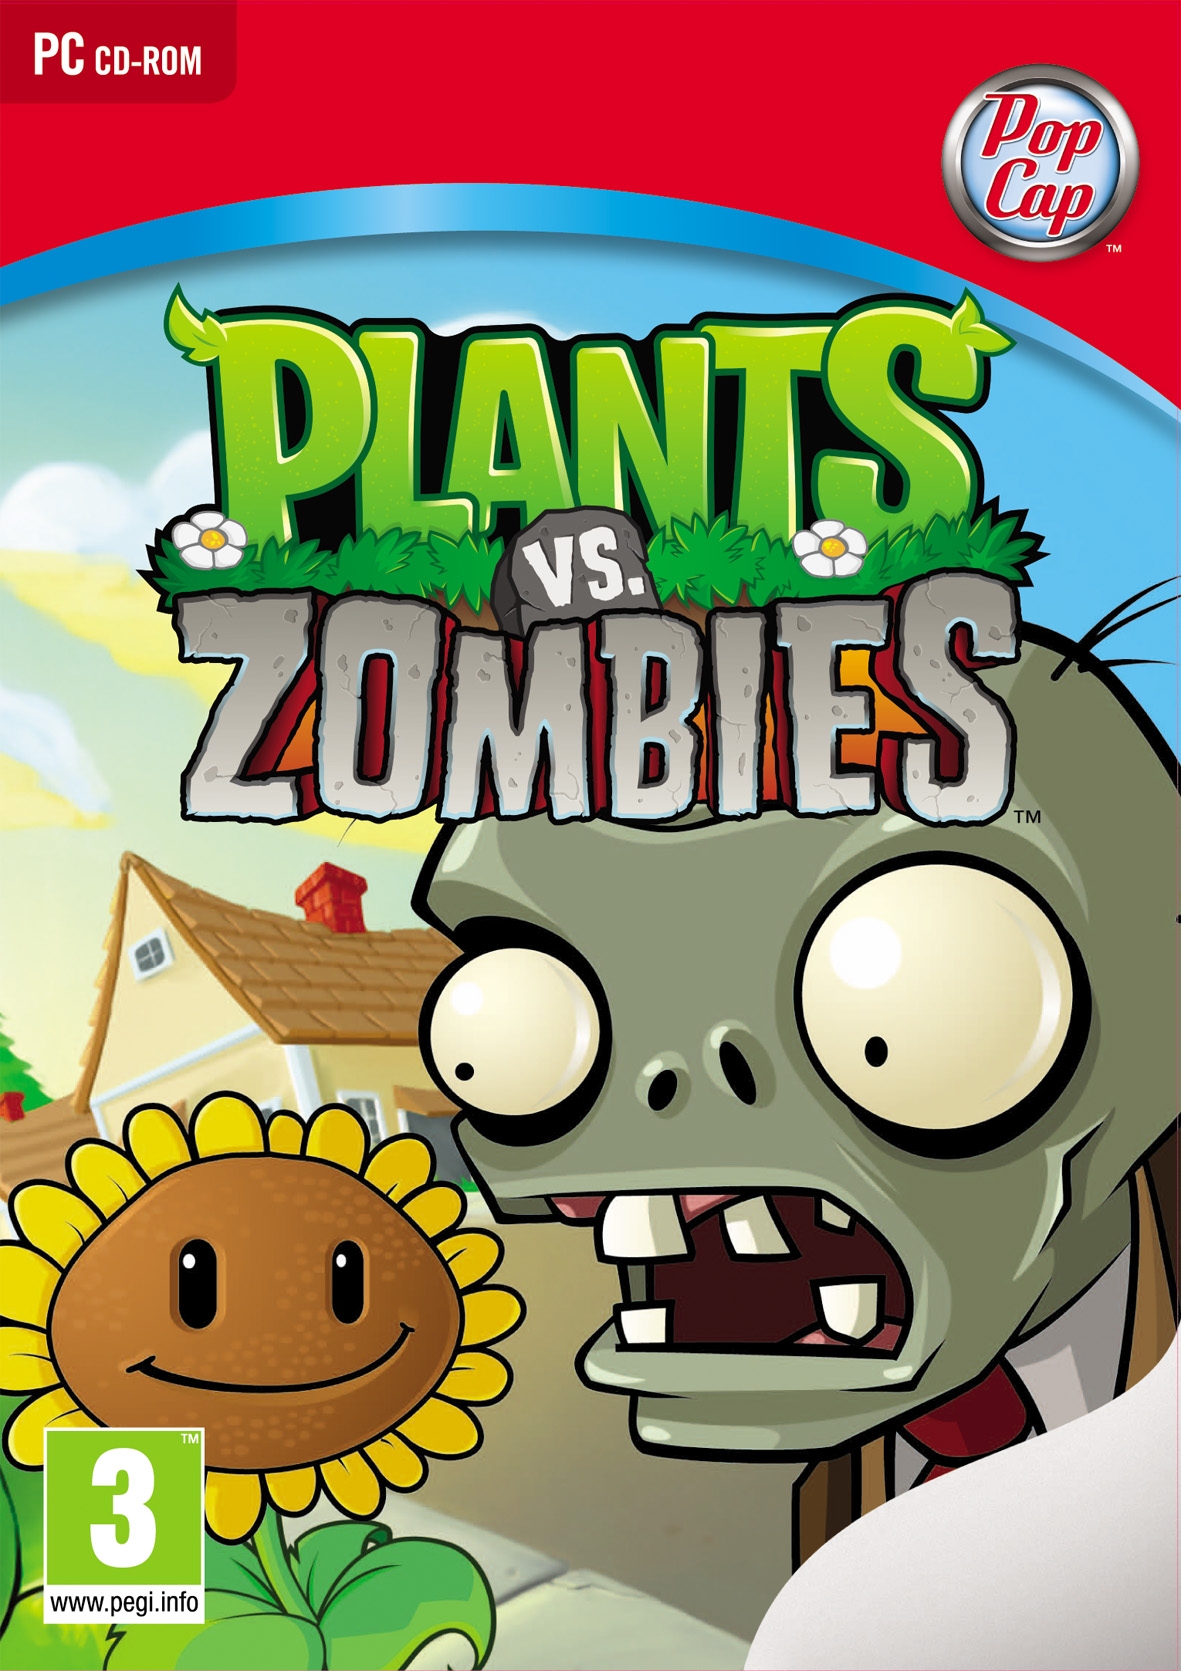 plants vs zombies 2 pc download free full version